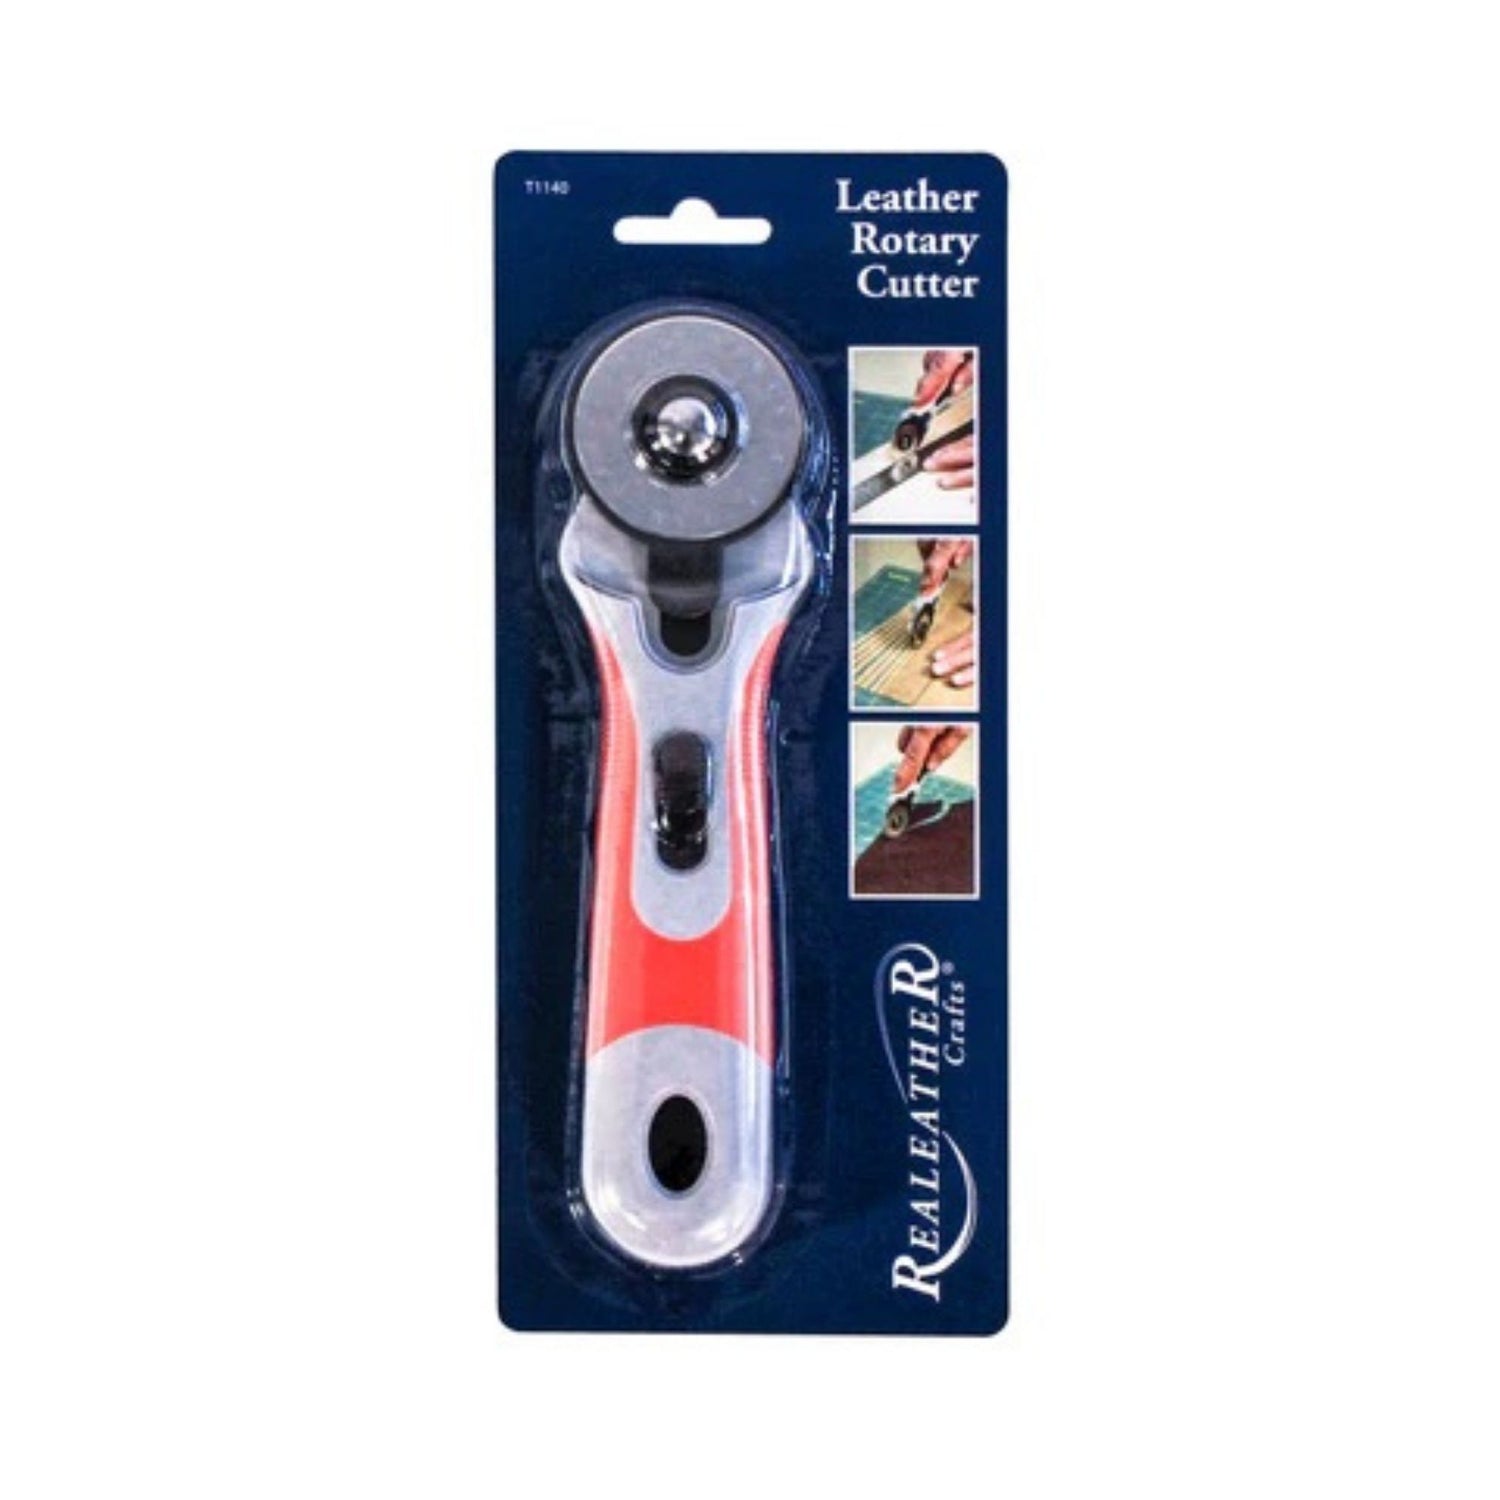 Leather Rotary Cutter